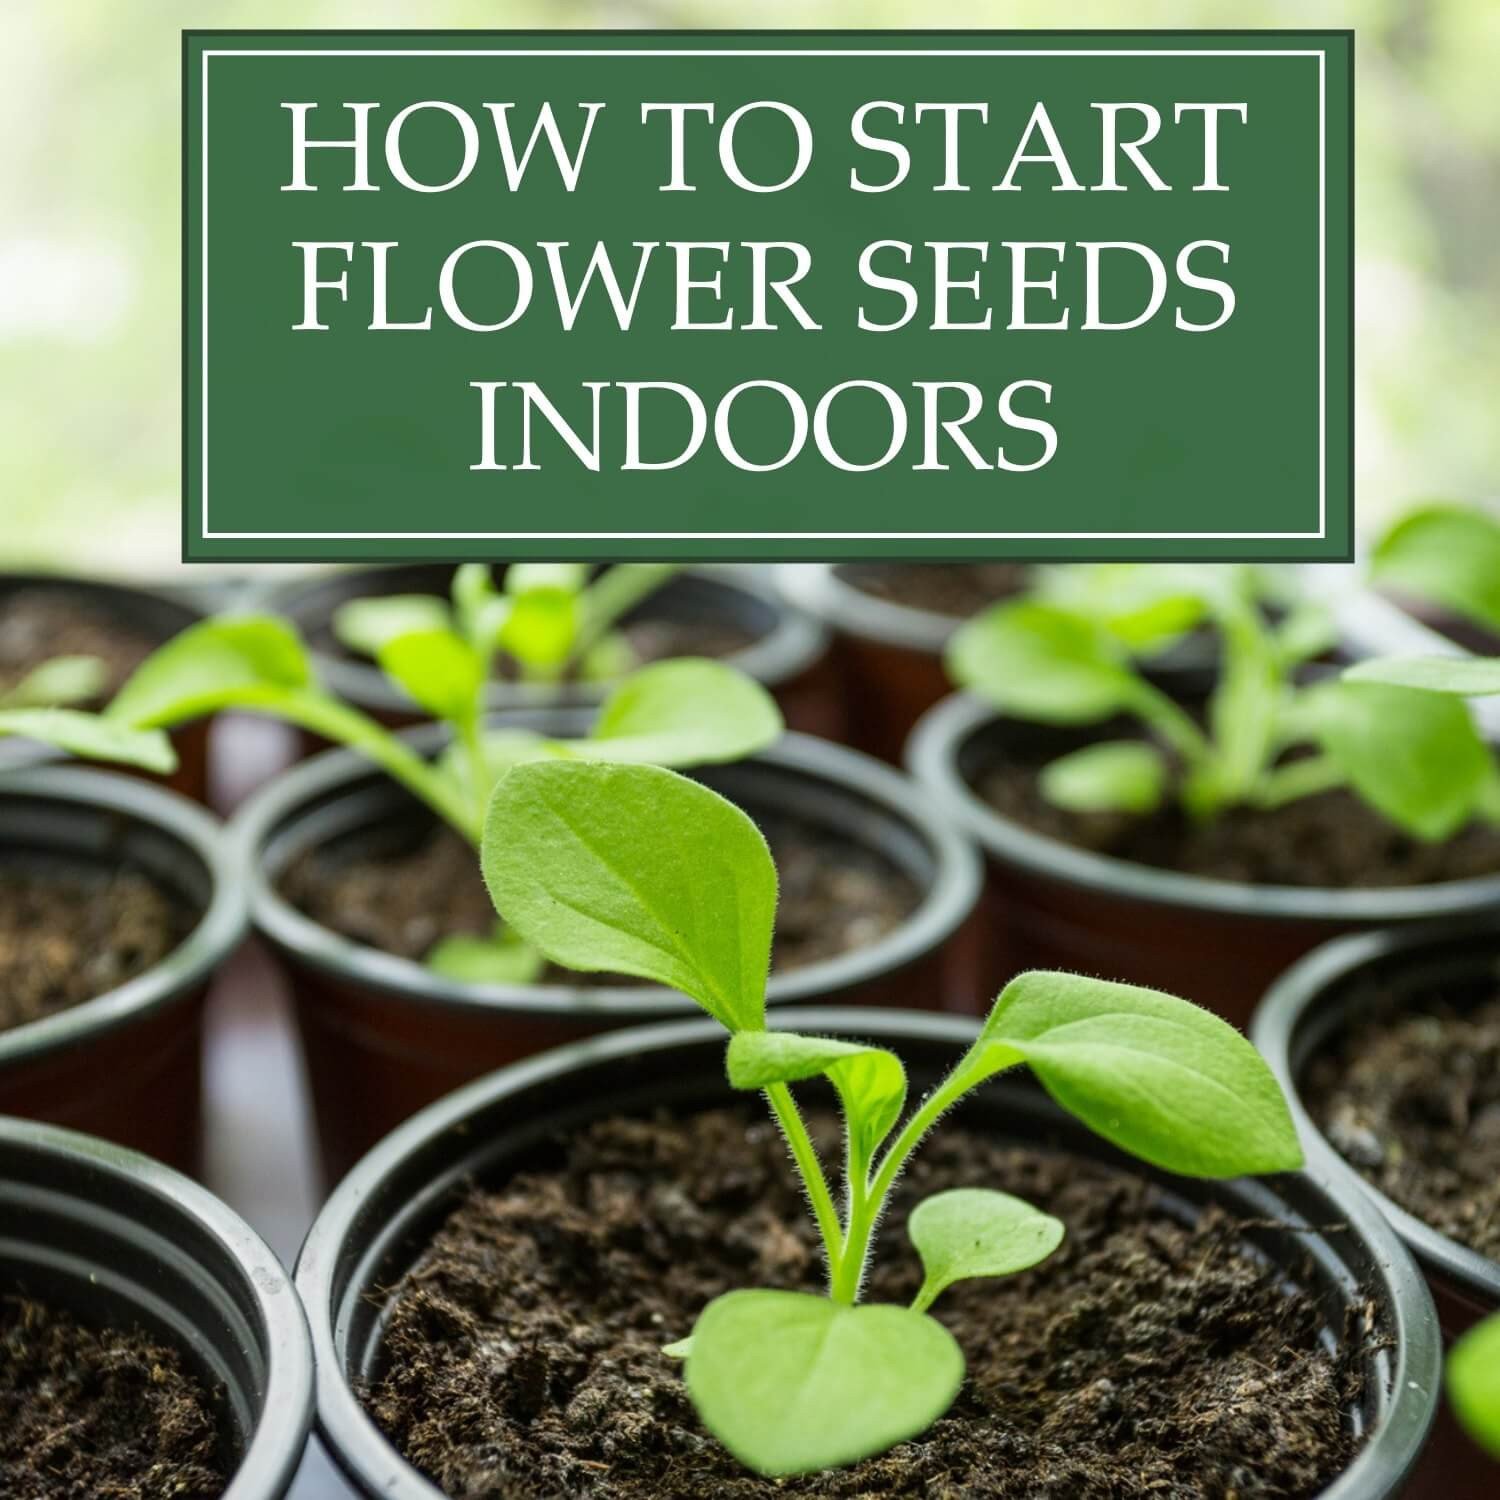 How to Start Flower Seeds Indoors